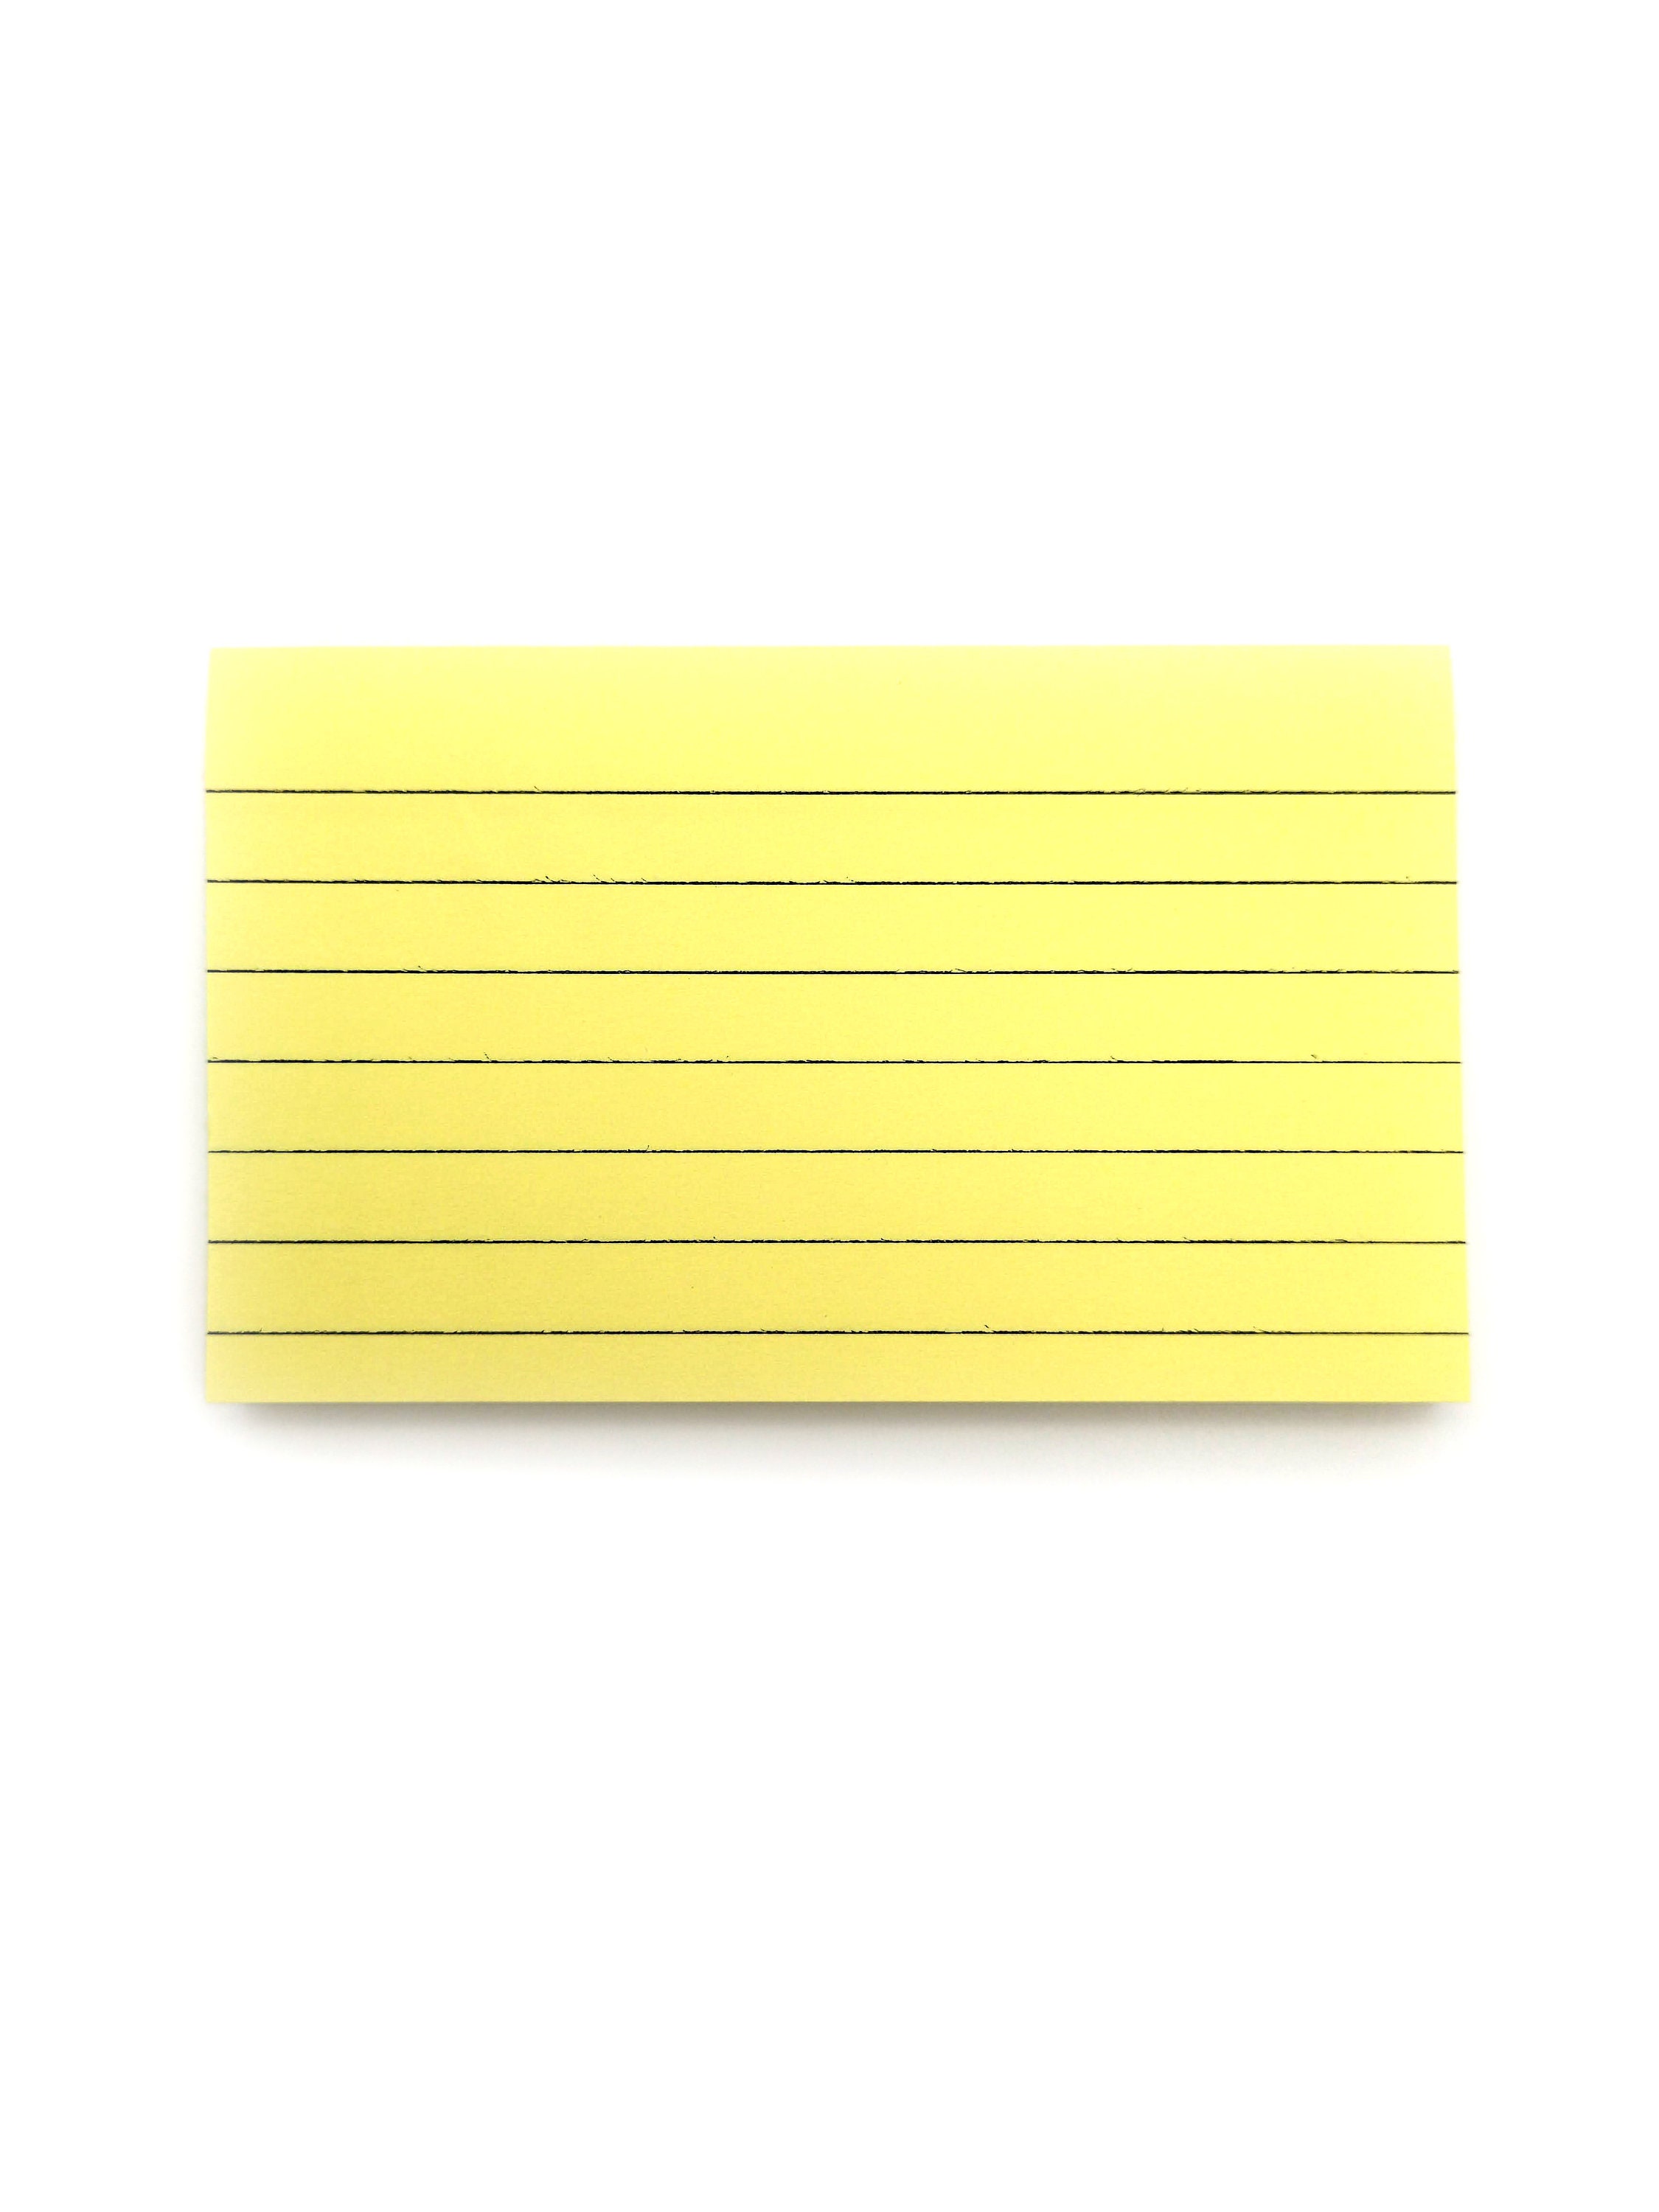 Rectangle Sticky Notes / Pastel Post It Notes / Memo Pads of 100 Pages Each  127x76mm / Great for Studying, Reminders & to Do Lists 